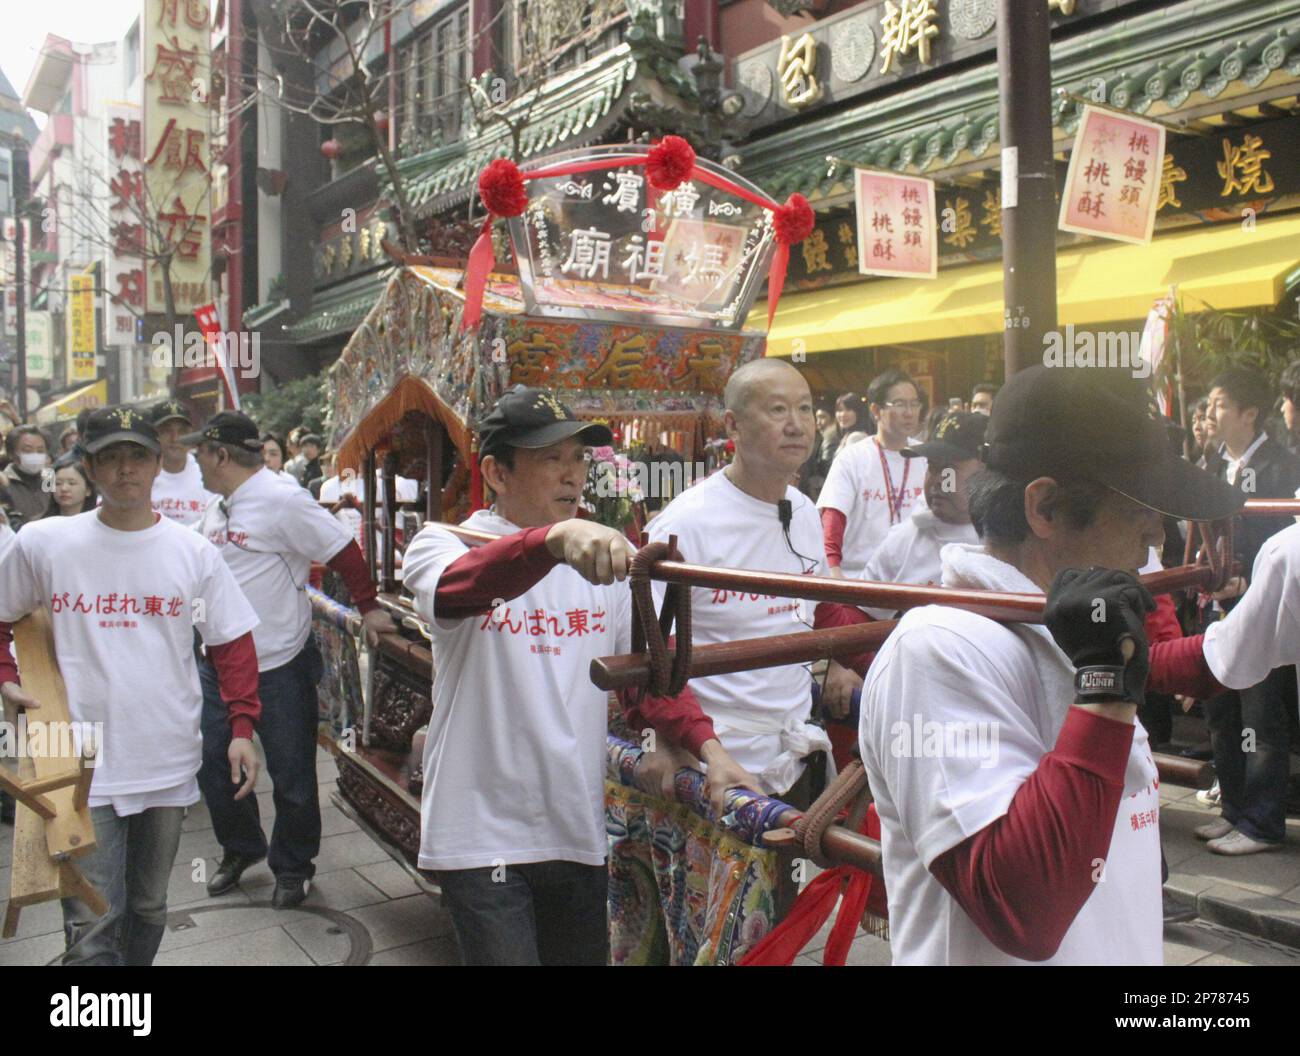 Wearing T-shirts with "Ganbare Tohoku, or Pep up Northeastern Japan" slogans, people parade through a street in Chinatown in Yokohama, near Tokyo, carrying a portable shrine of Mazu, or tin Hau, the Goddess of the Sea, celebrating the birth of the goddess, also known as the guardian of disaster and illness, Sunday, March 20, 2011. This year people collected donations from onlookers for evacuees of March 11 earthquake and tsunami in northeastern Japan. (AP Photo/Kyodo News) JAPAN OUT, MANDATORY CREDIT, NO LICENSING IN CHINA, HONG KONG, JAPAN, SOUTH KOREA AND FRANCE Stock Photo